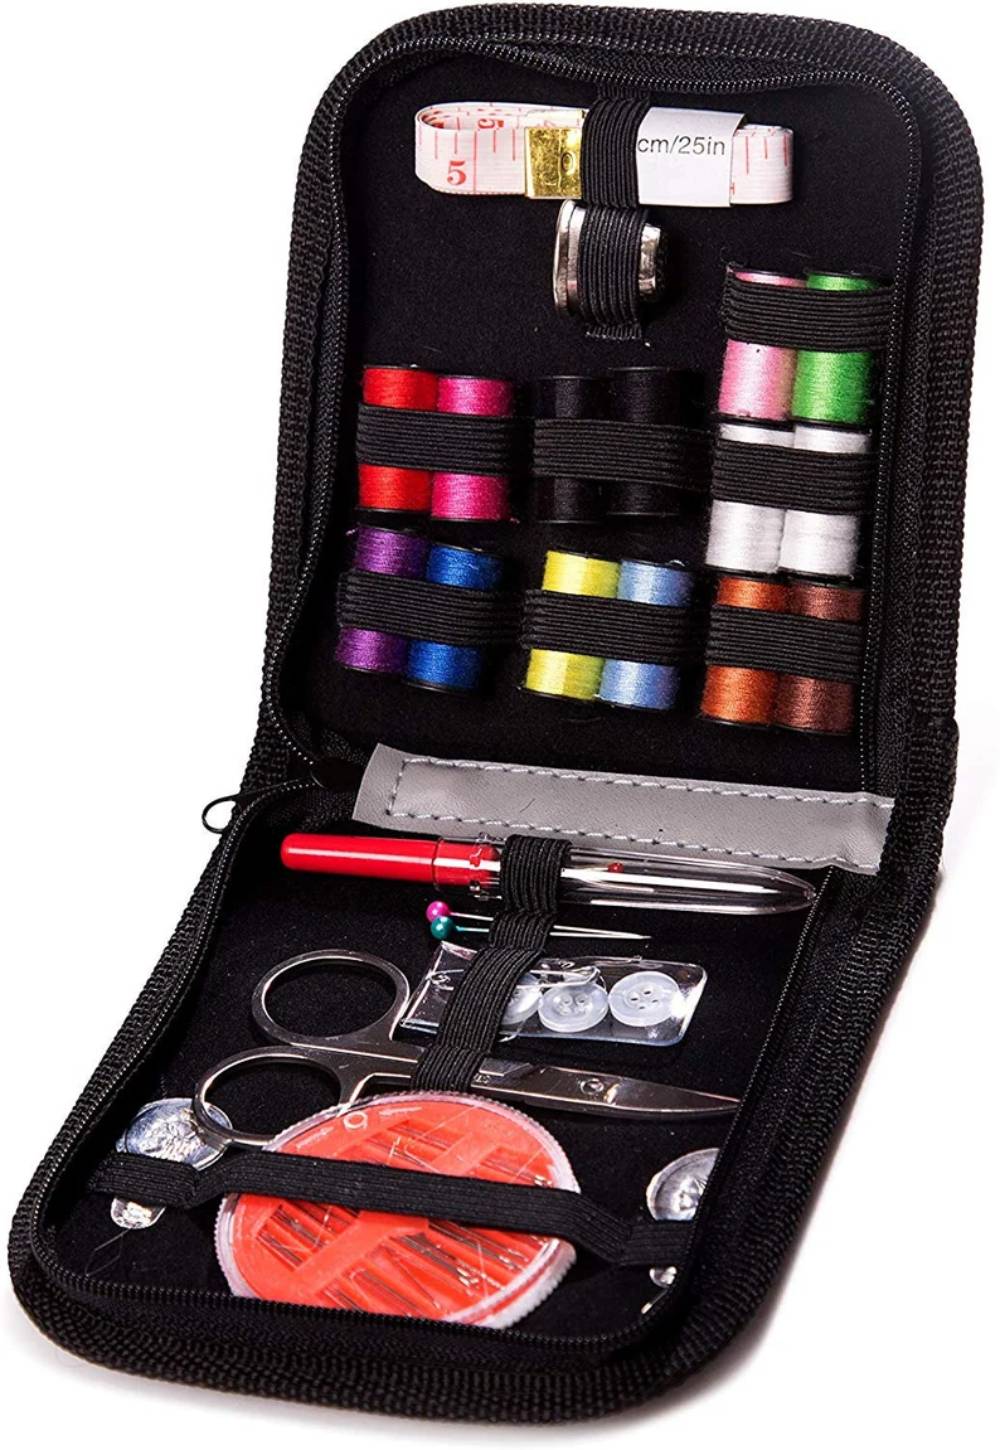 Portable Mini Travel Sewing Kit Organiser With Color Needle